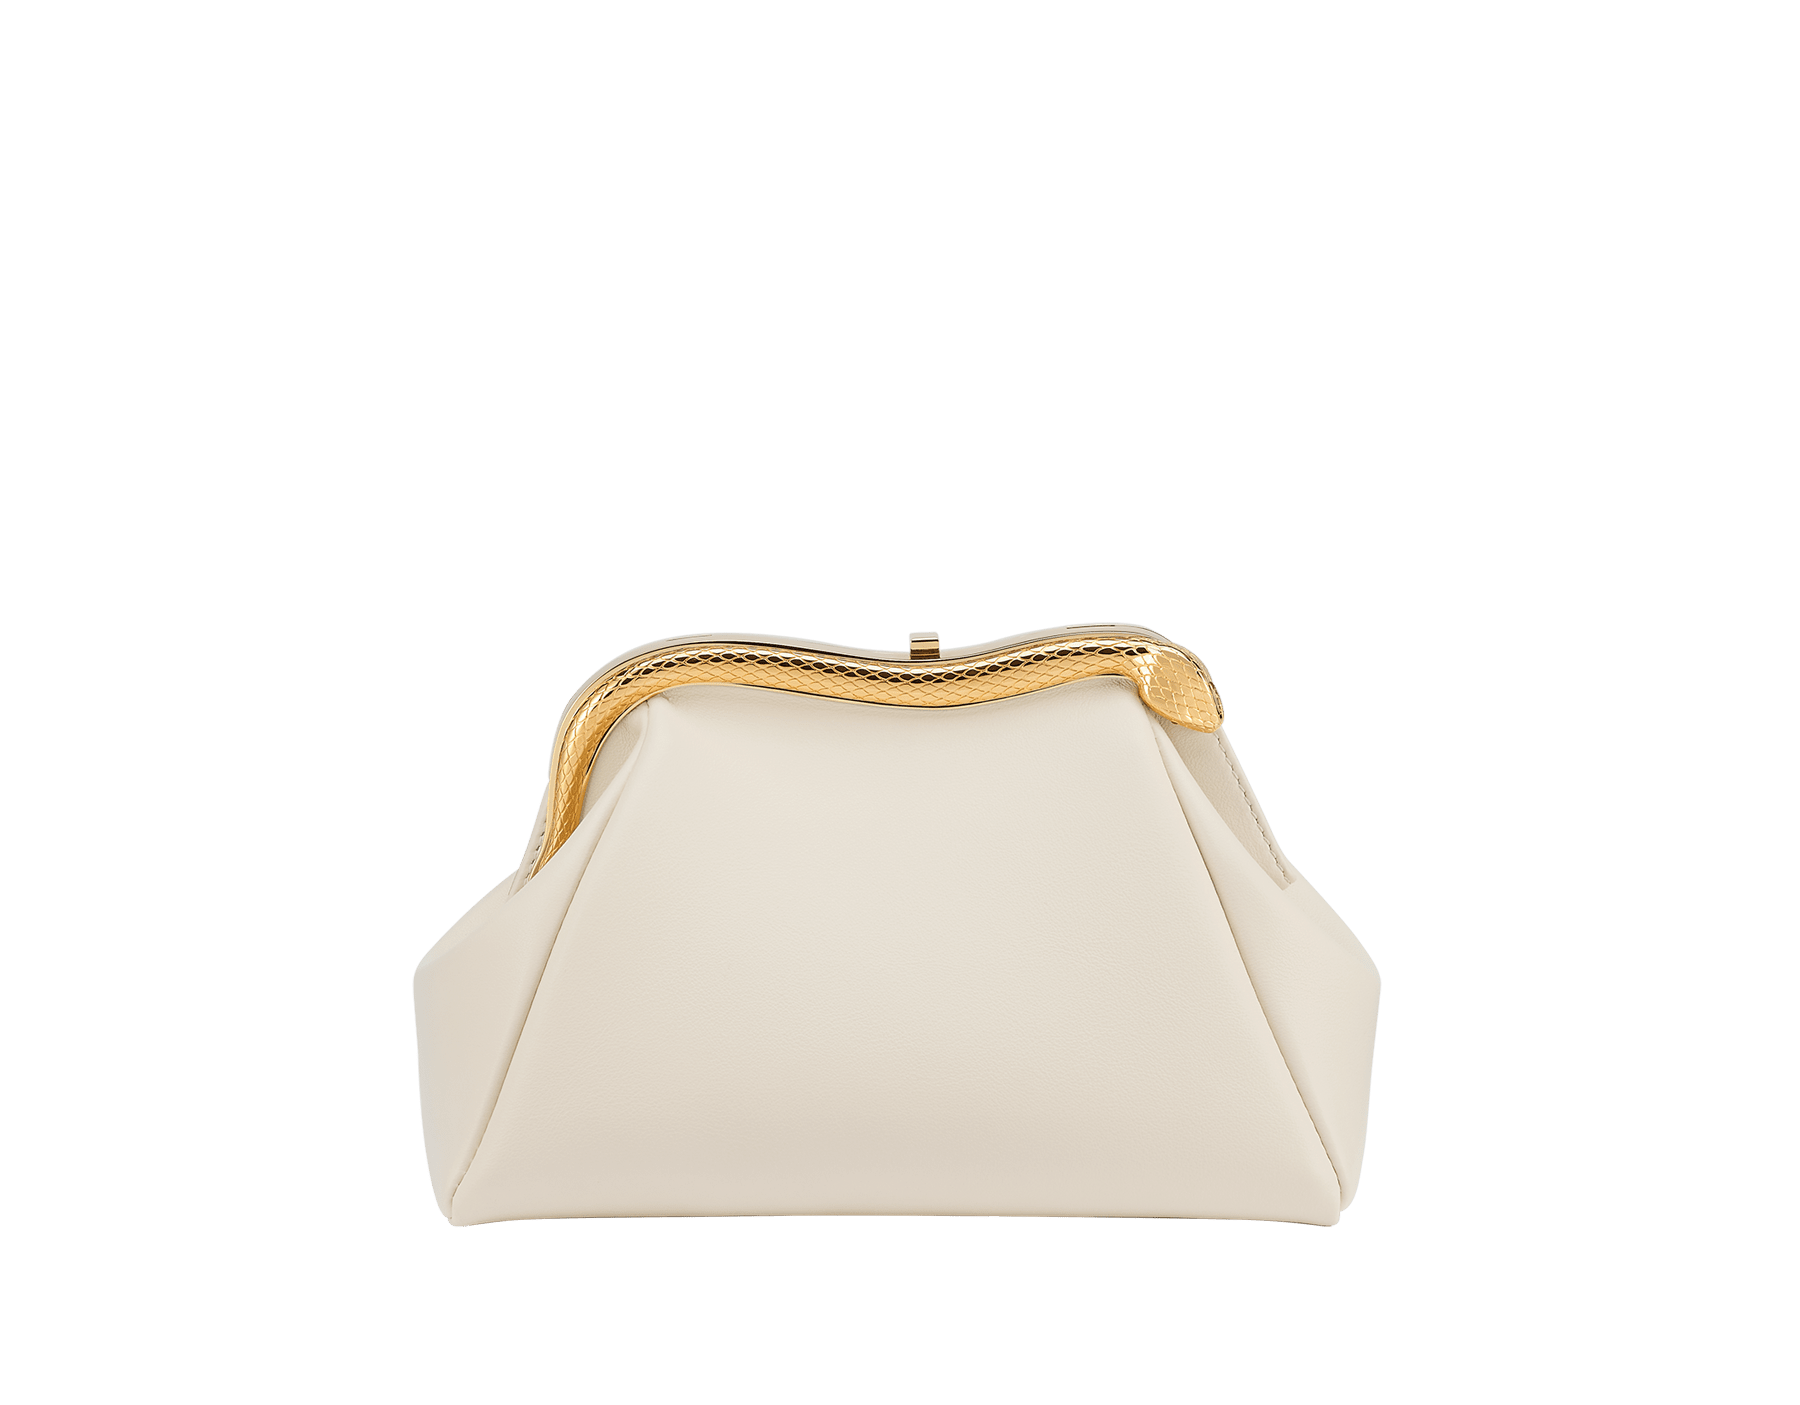 Serpentine small pouch in ivory opal smooth calf leather with black nappa leather lining. Captivating snake body-shaped frame in gold-plated brass embellished with engraved scales and red enamel eyes on one side and an ivory opal smooth calf leather insert on the other, and a press button closure. SRN-1239b image 1